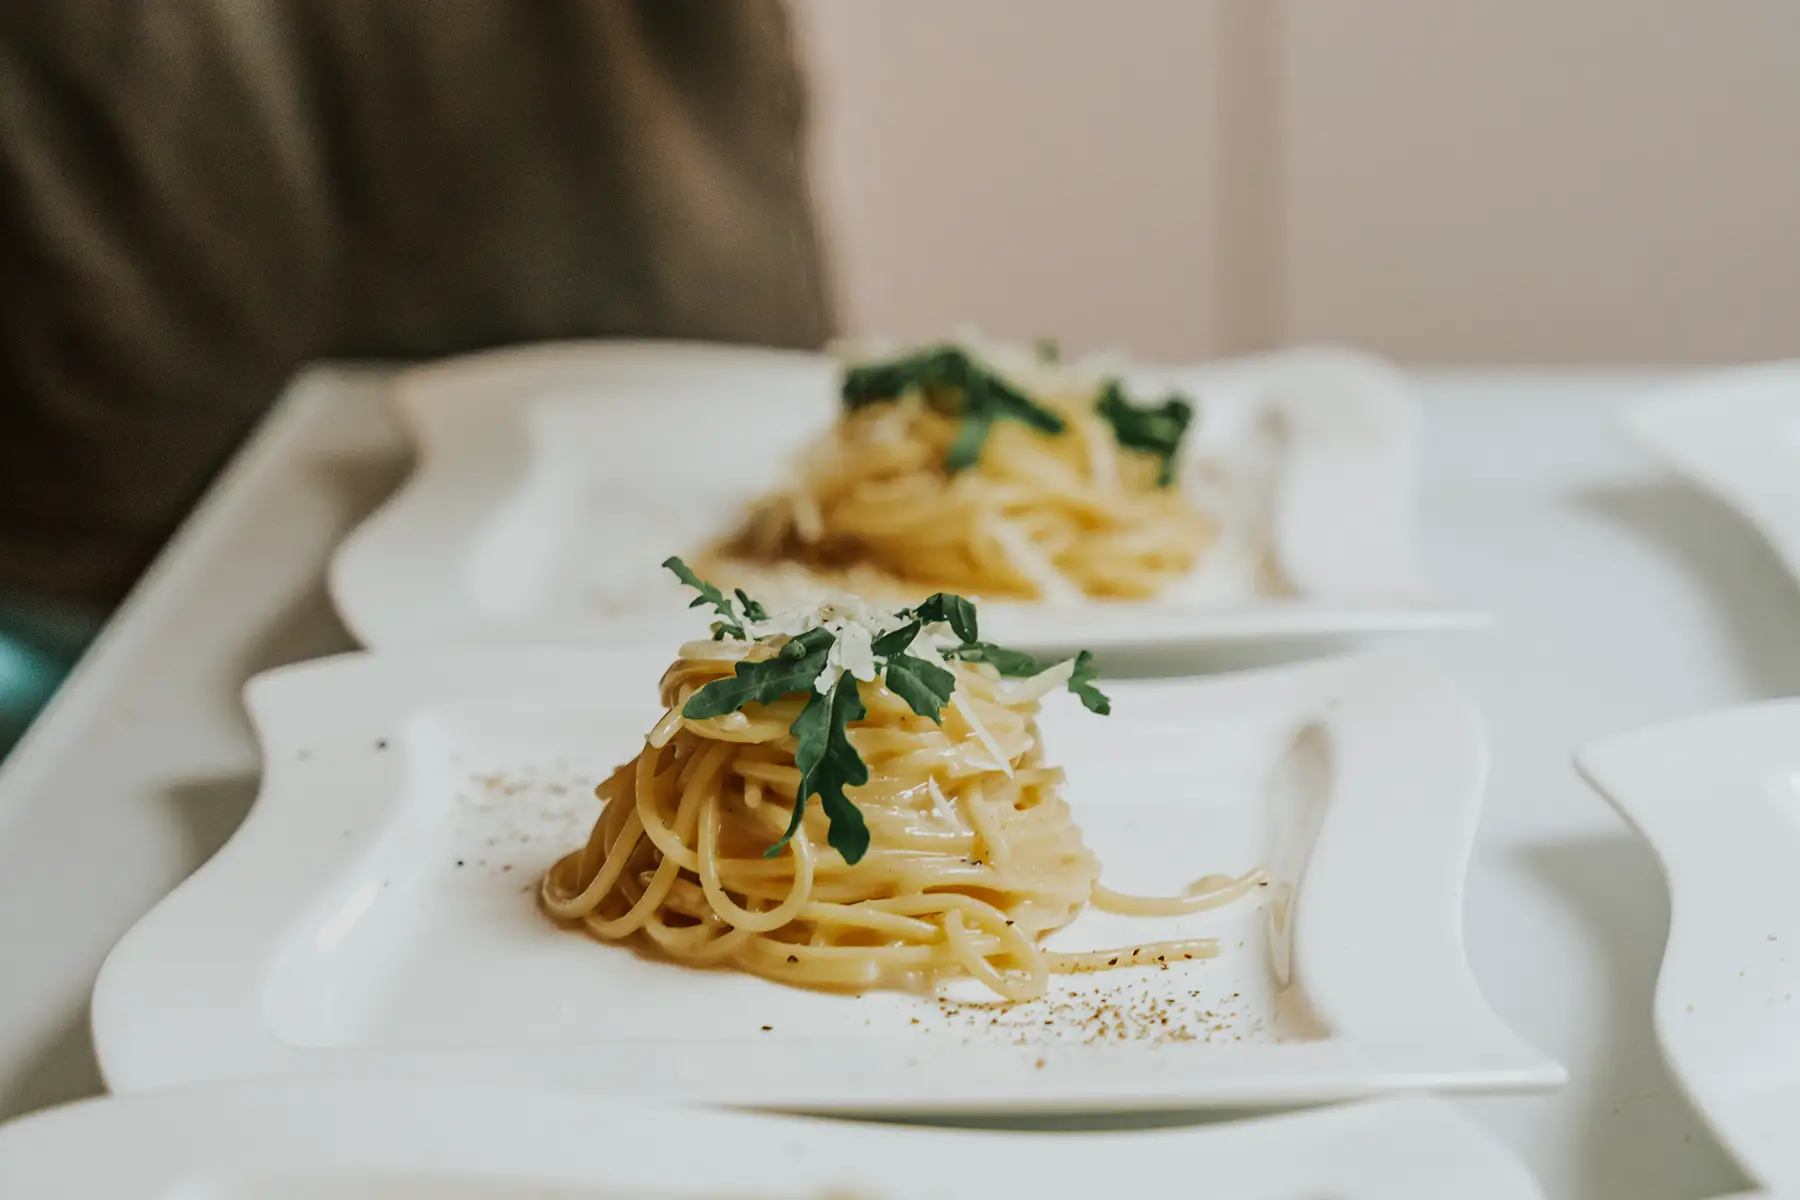 Cacio e pepe: small mound of pasta with pepper, cheese, and herbs on a square white plate